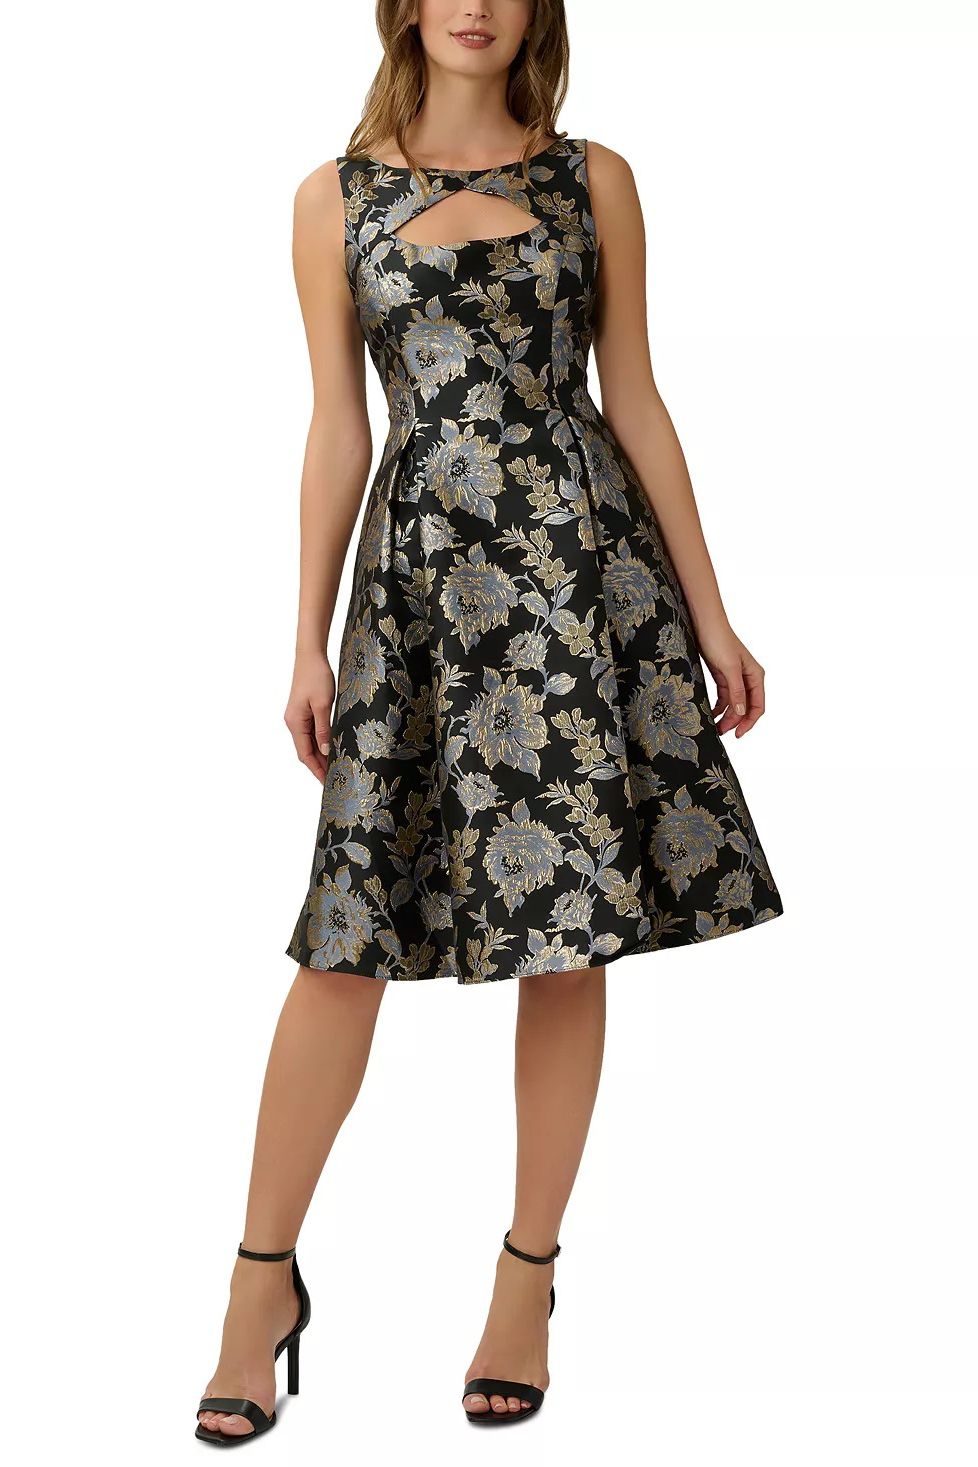 Adrianna Papell cutout front jacquard dress